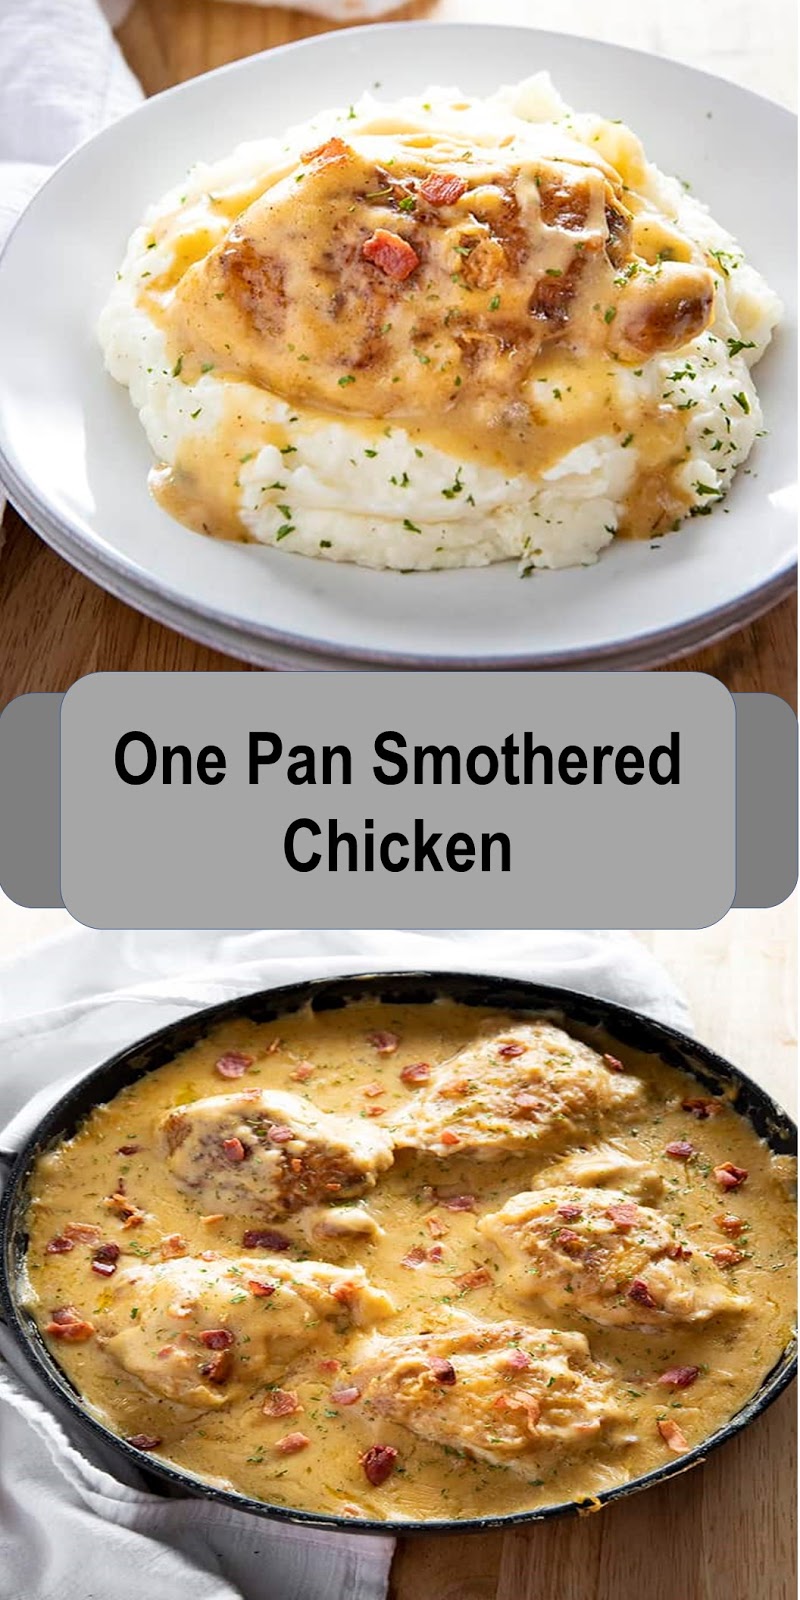 One Pan Smothered Chicken #chicken #christmas #yummy